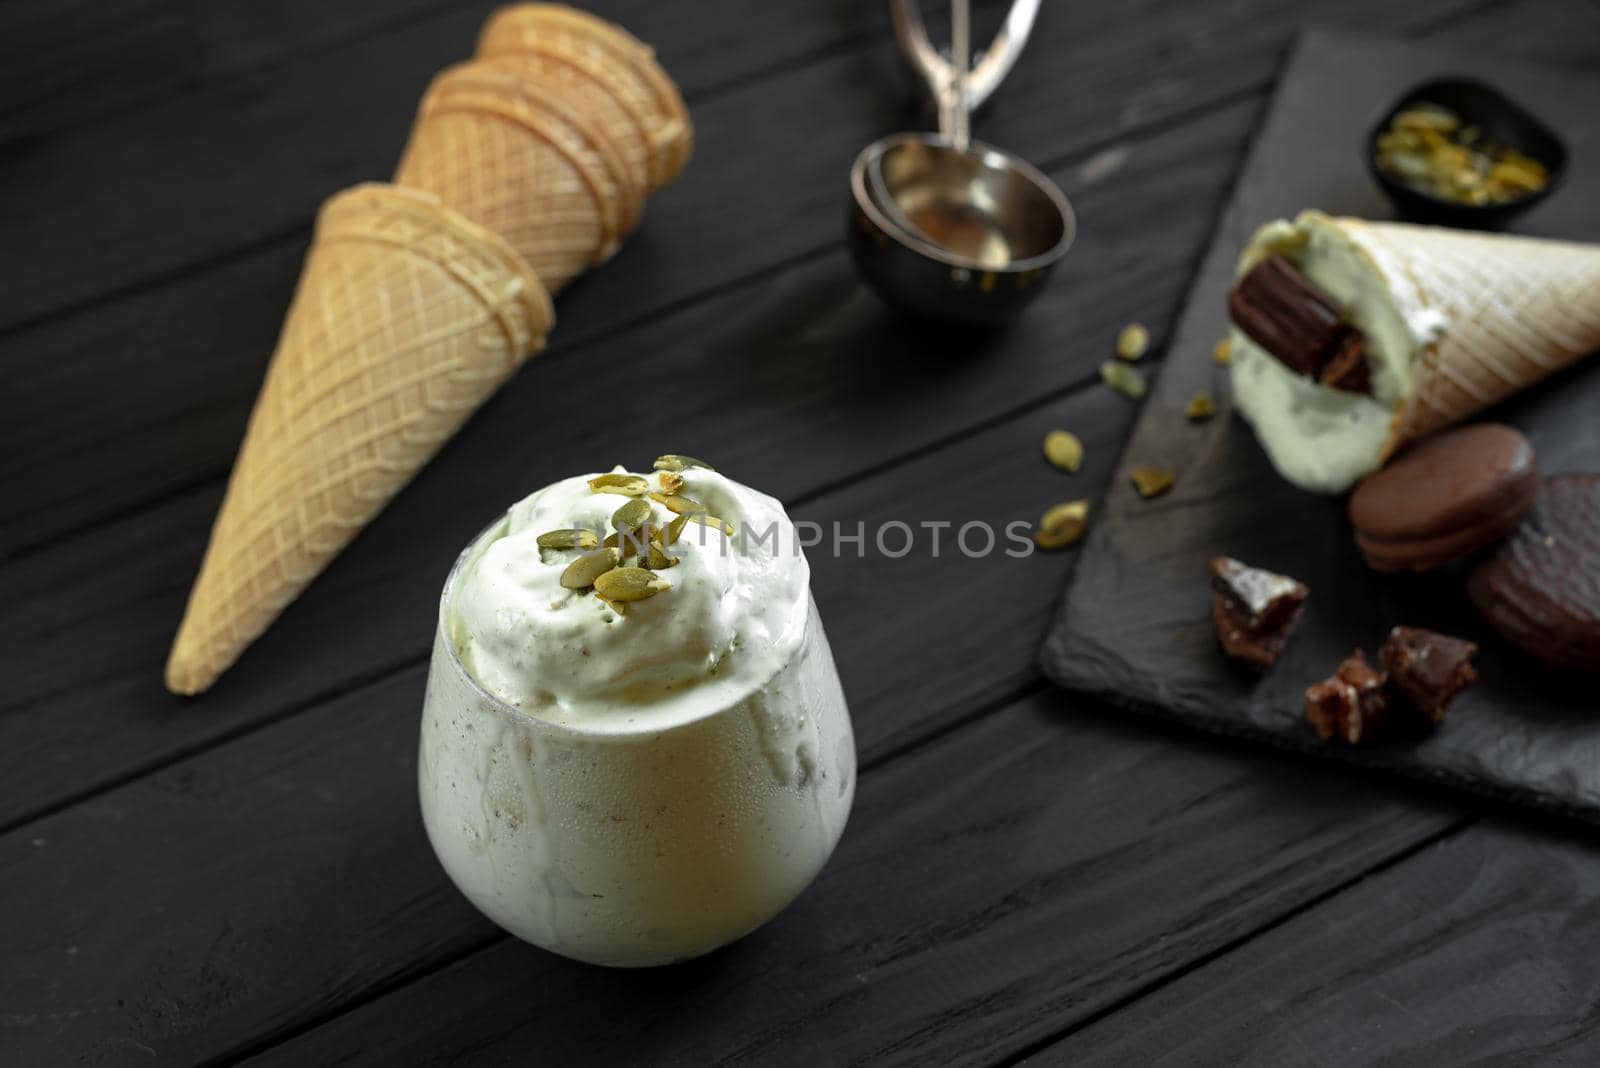 Homemade pistachio ice cream on a dark background. Ingredients for making ice cream on a wooden background.